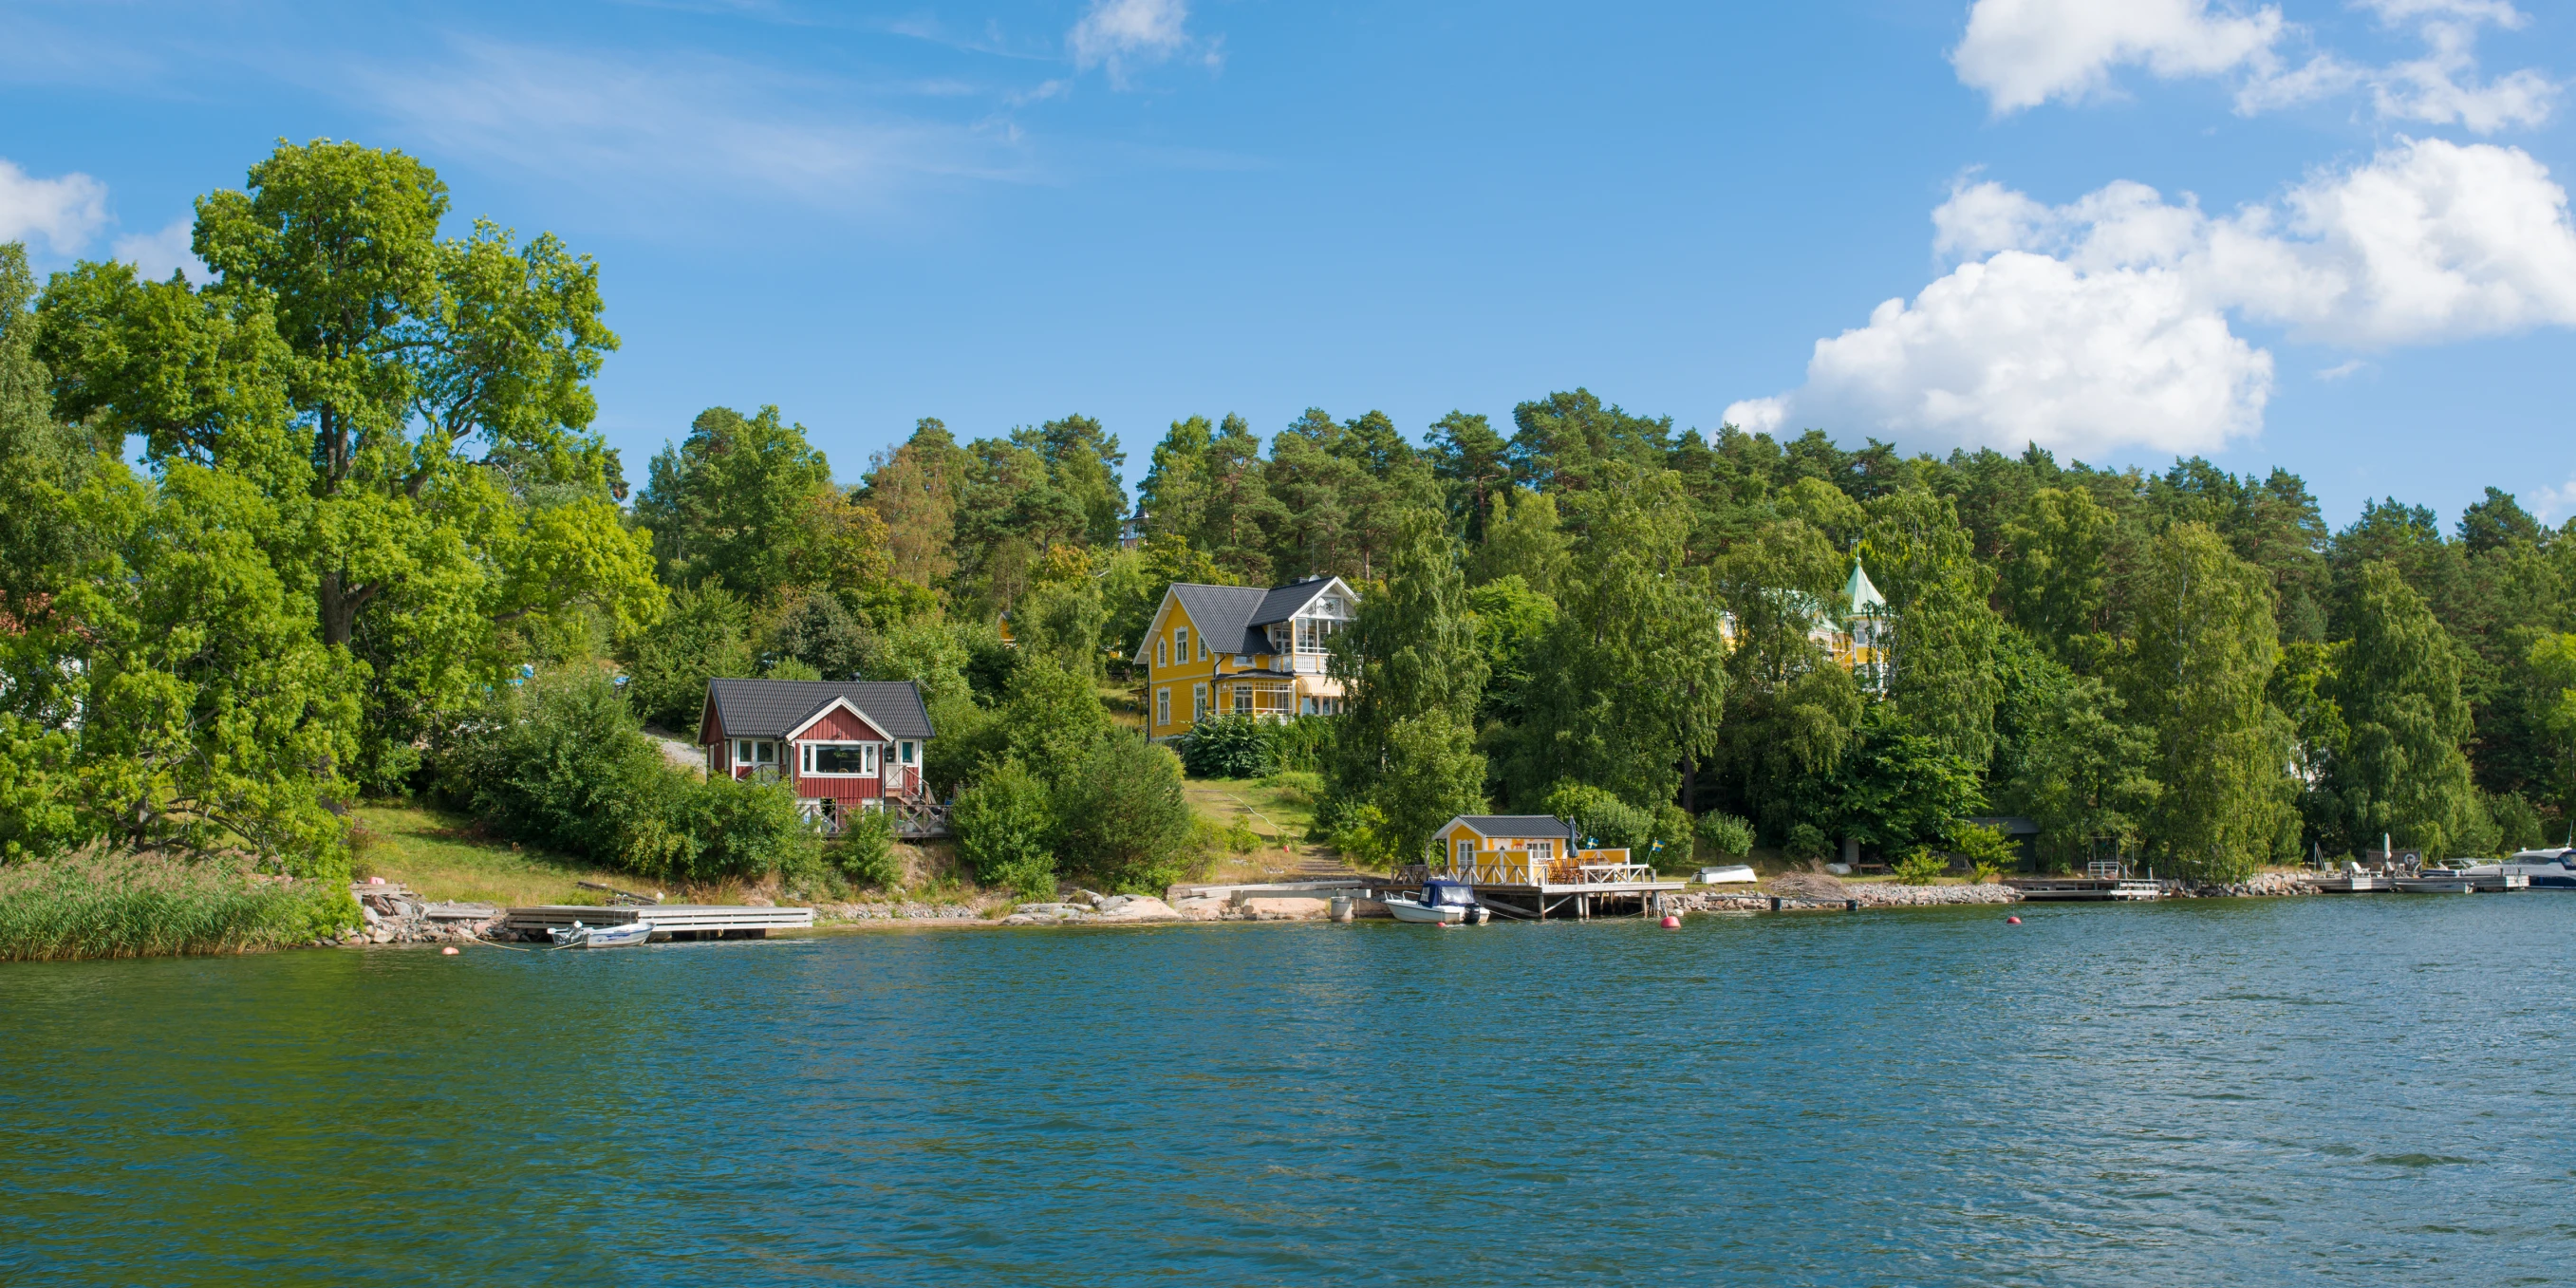 small houses on the bank of a large lake